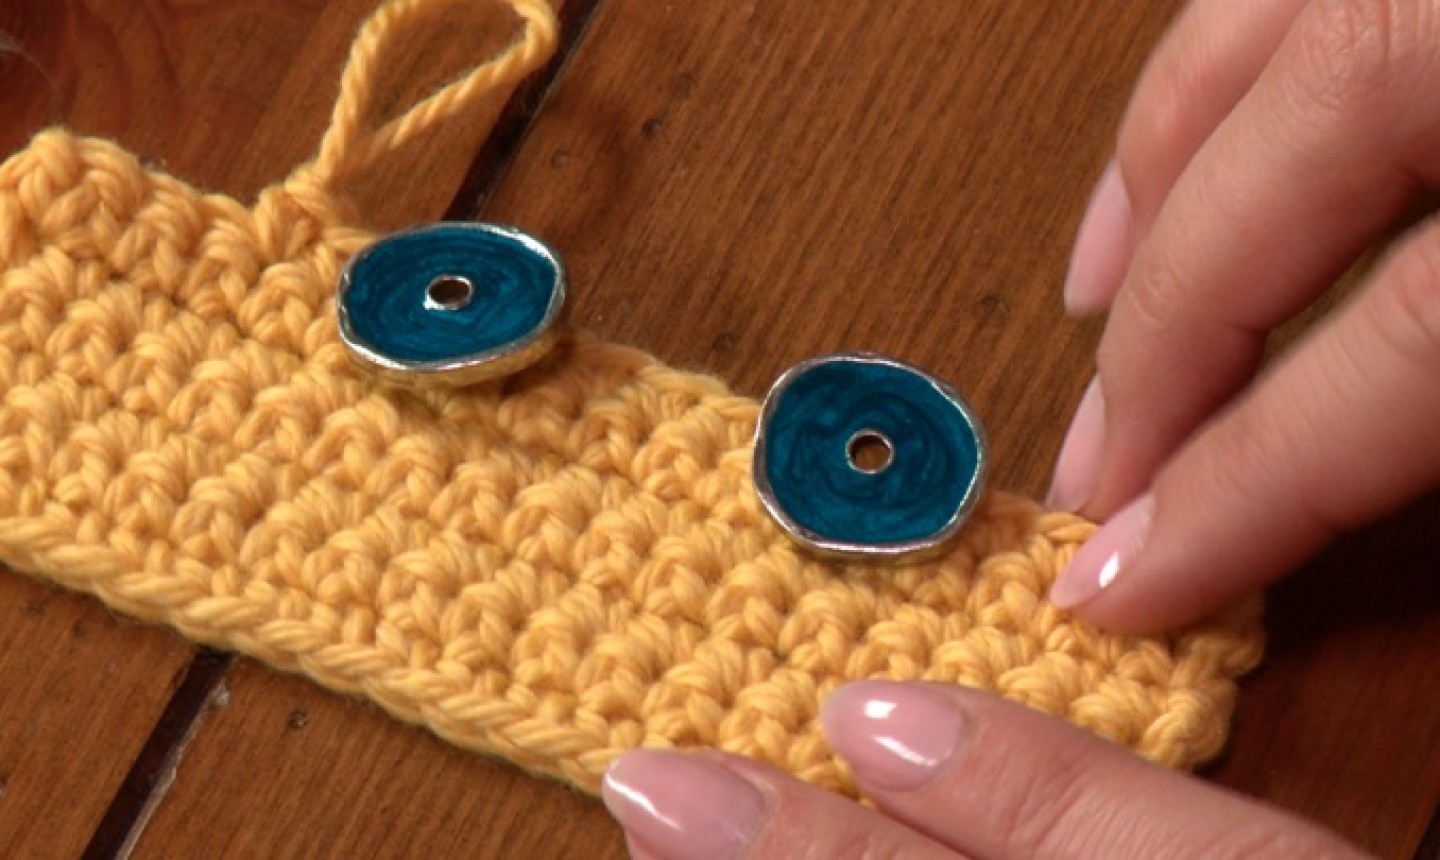 Inserting Buttonholes & Attaching Buttons (or other closures